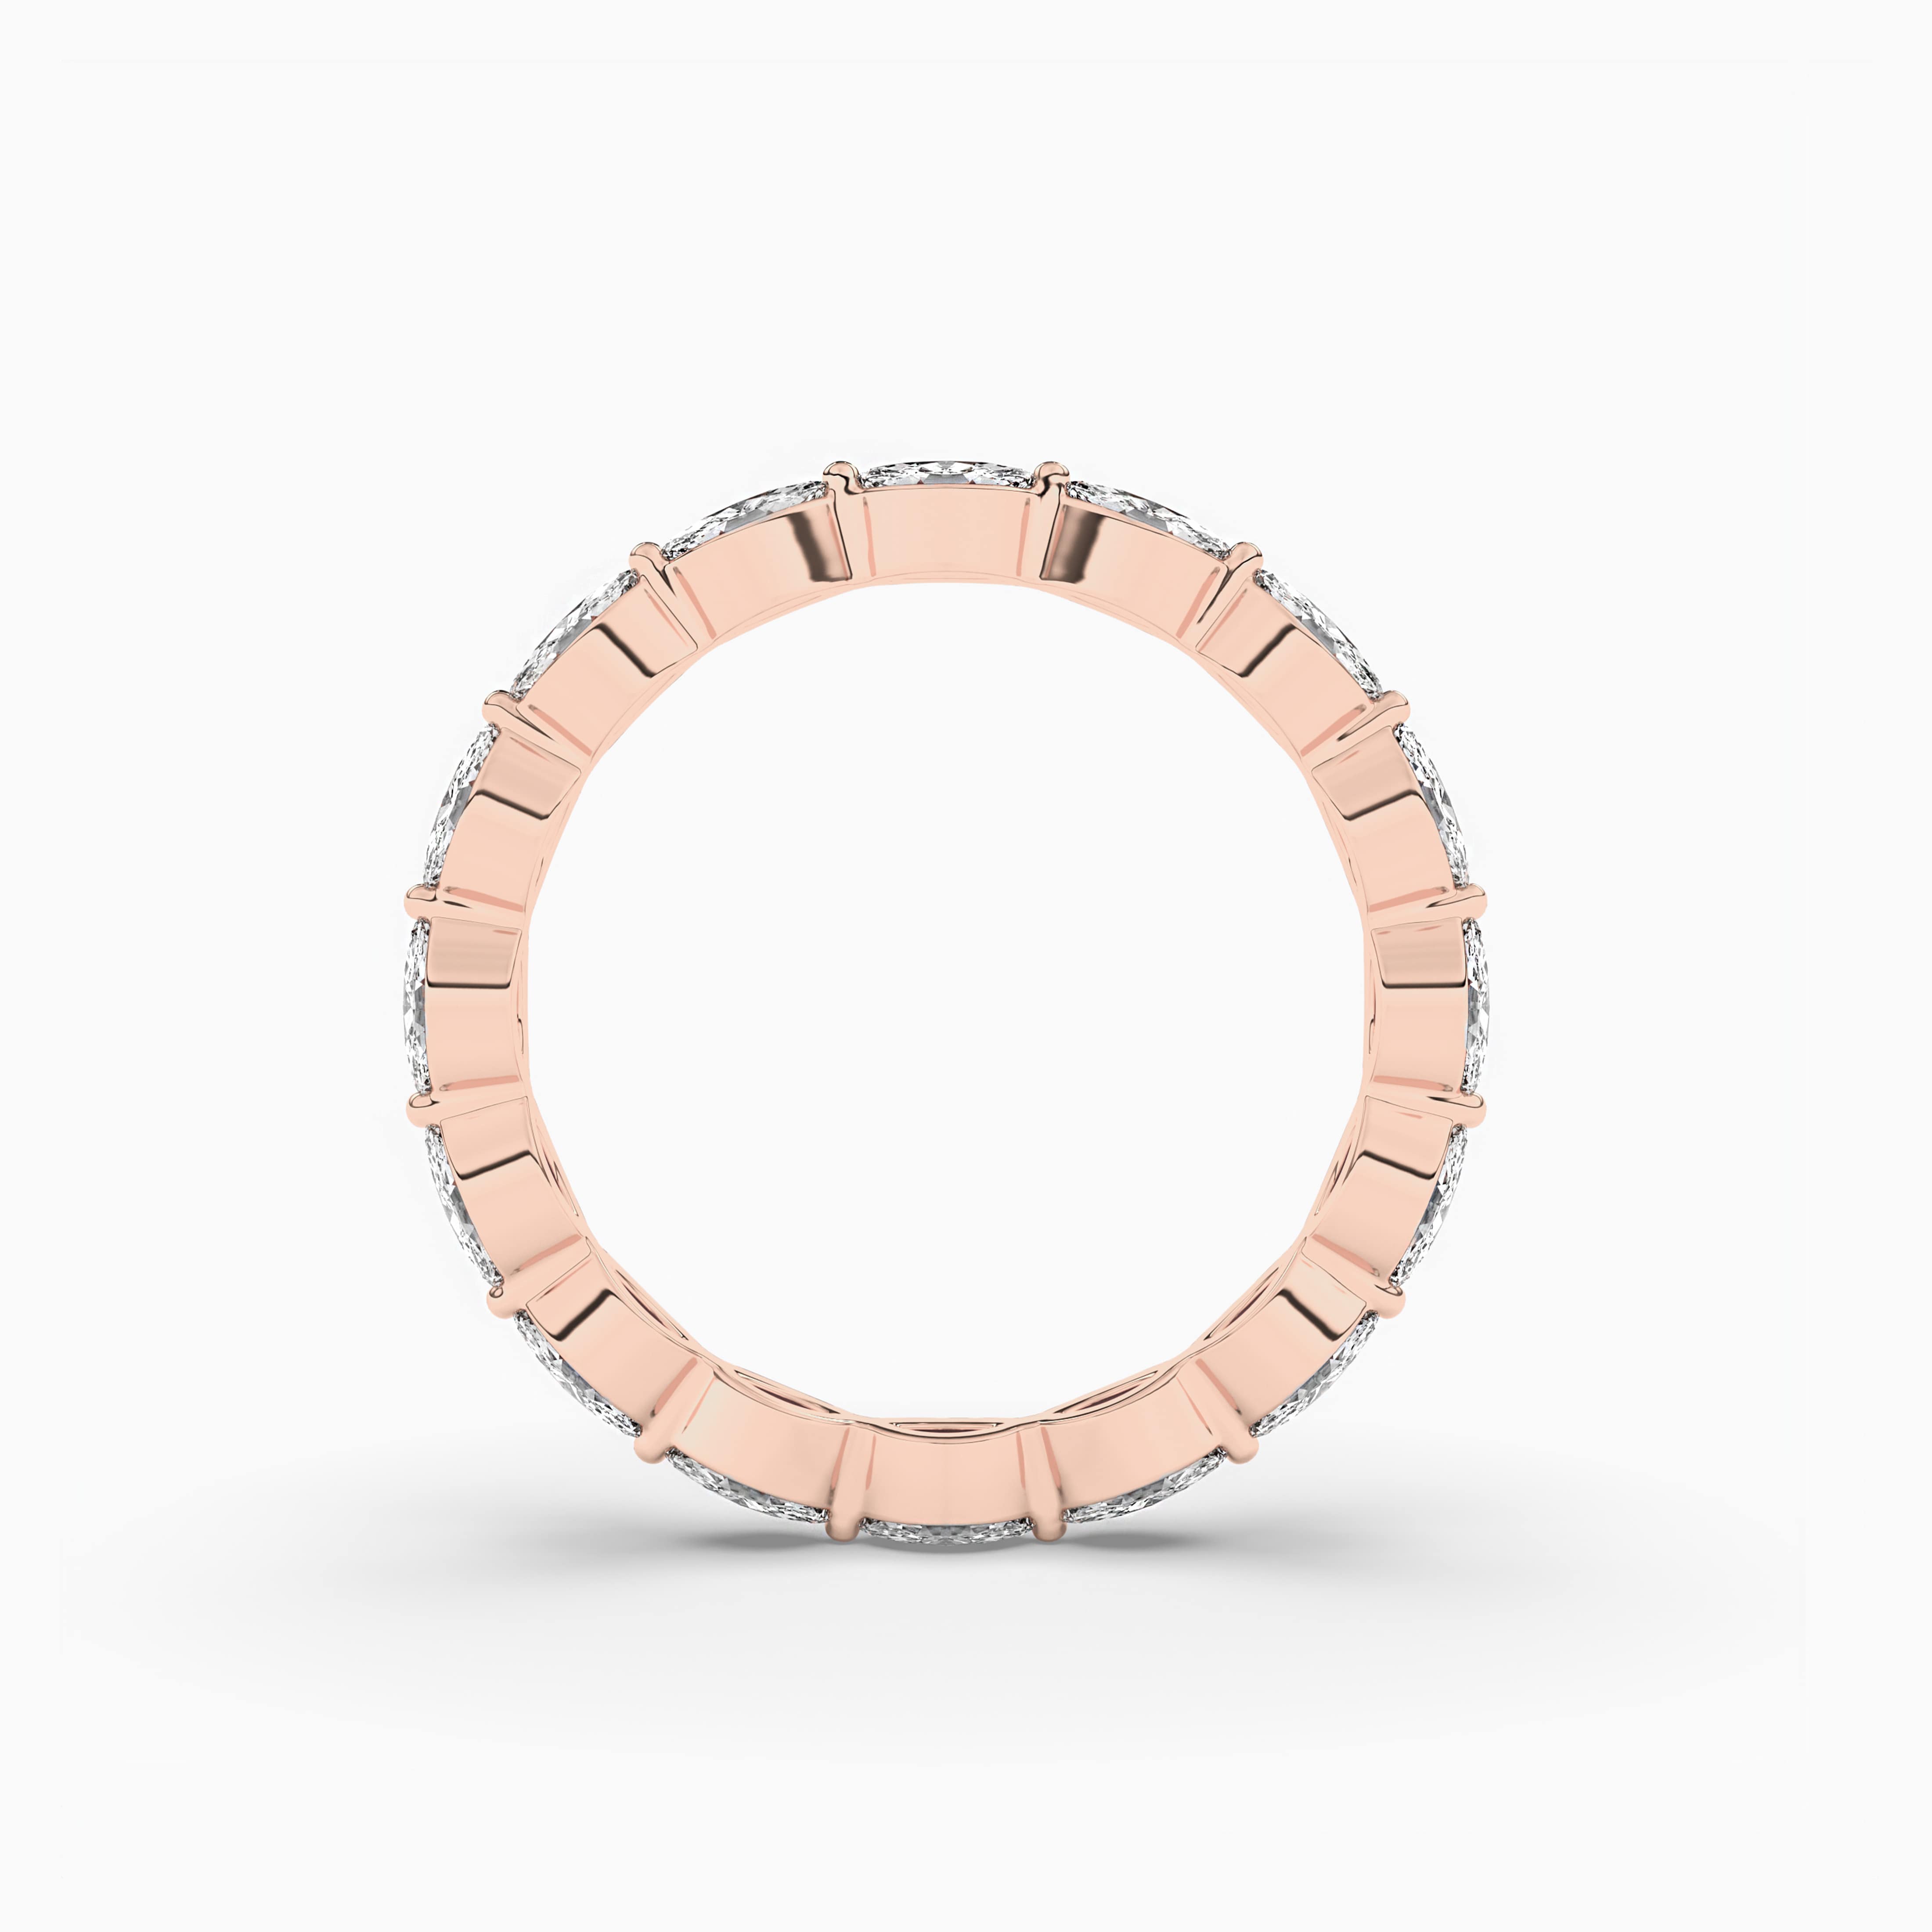 MARQUISE EAST WEST DIAMOND ETERNITY WEDDING BAND IN ROSE GOLD